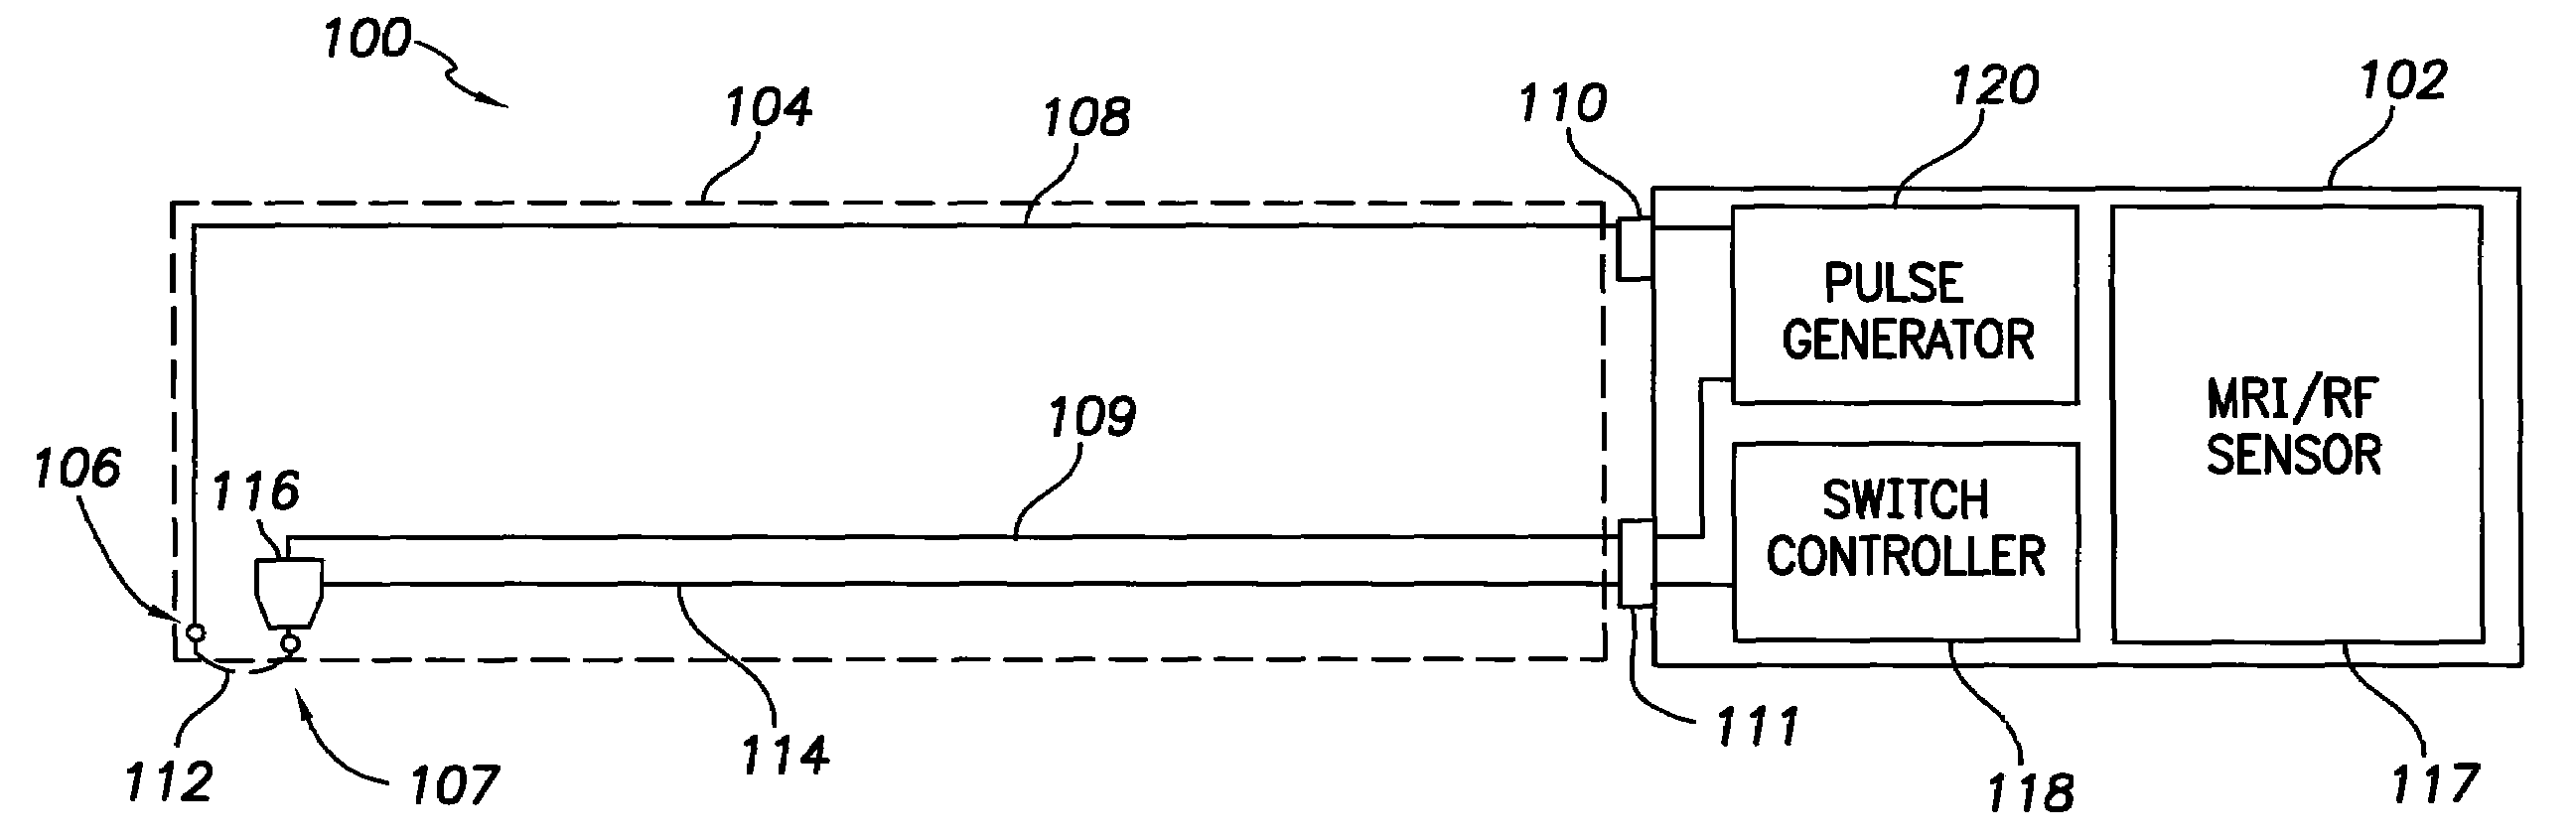 Systems and Methods for Disconnecting Electrodes of Leads of Implantable Medical Devices During an MRI to Reduce Lead Heating